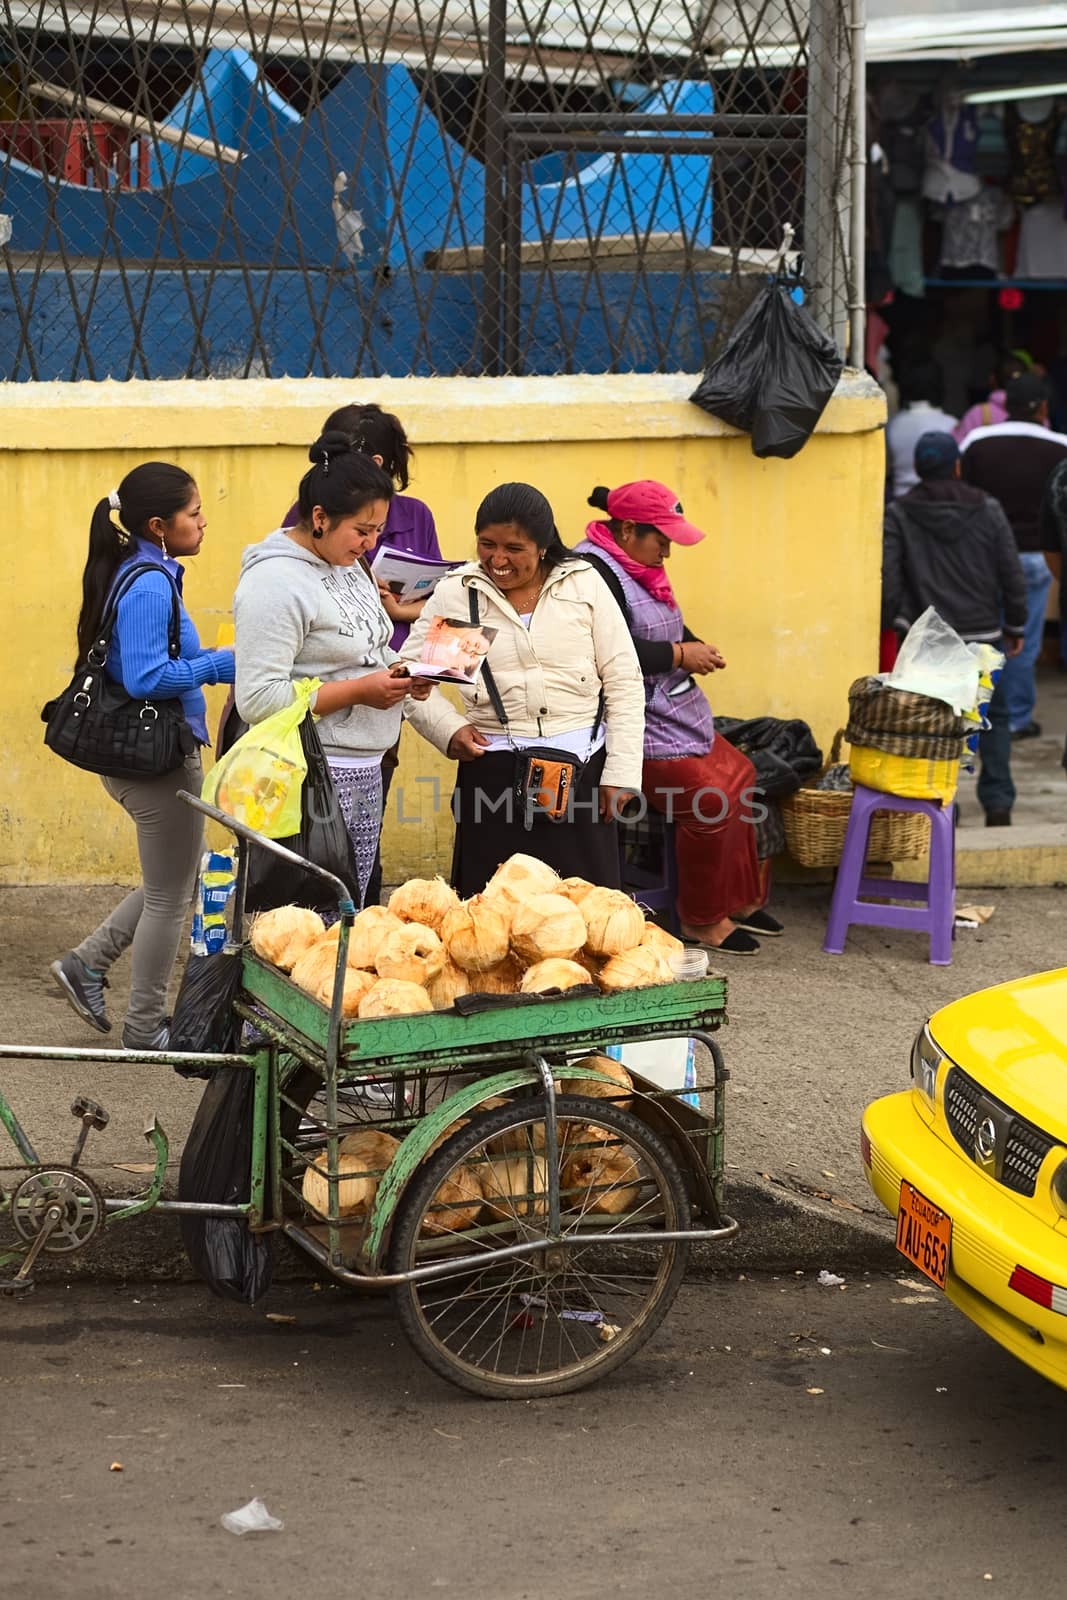 AMBATO, ECUADOR - MAY 12, 2014: Unidentified people on the sidewalk with a small cart of coconuts on the roadside on May 12, 2014 in Ambato, Ecuador.